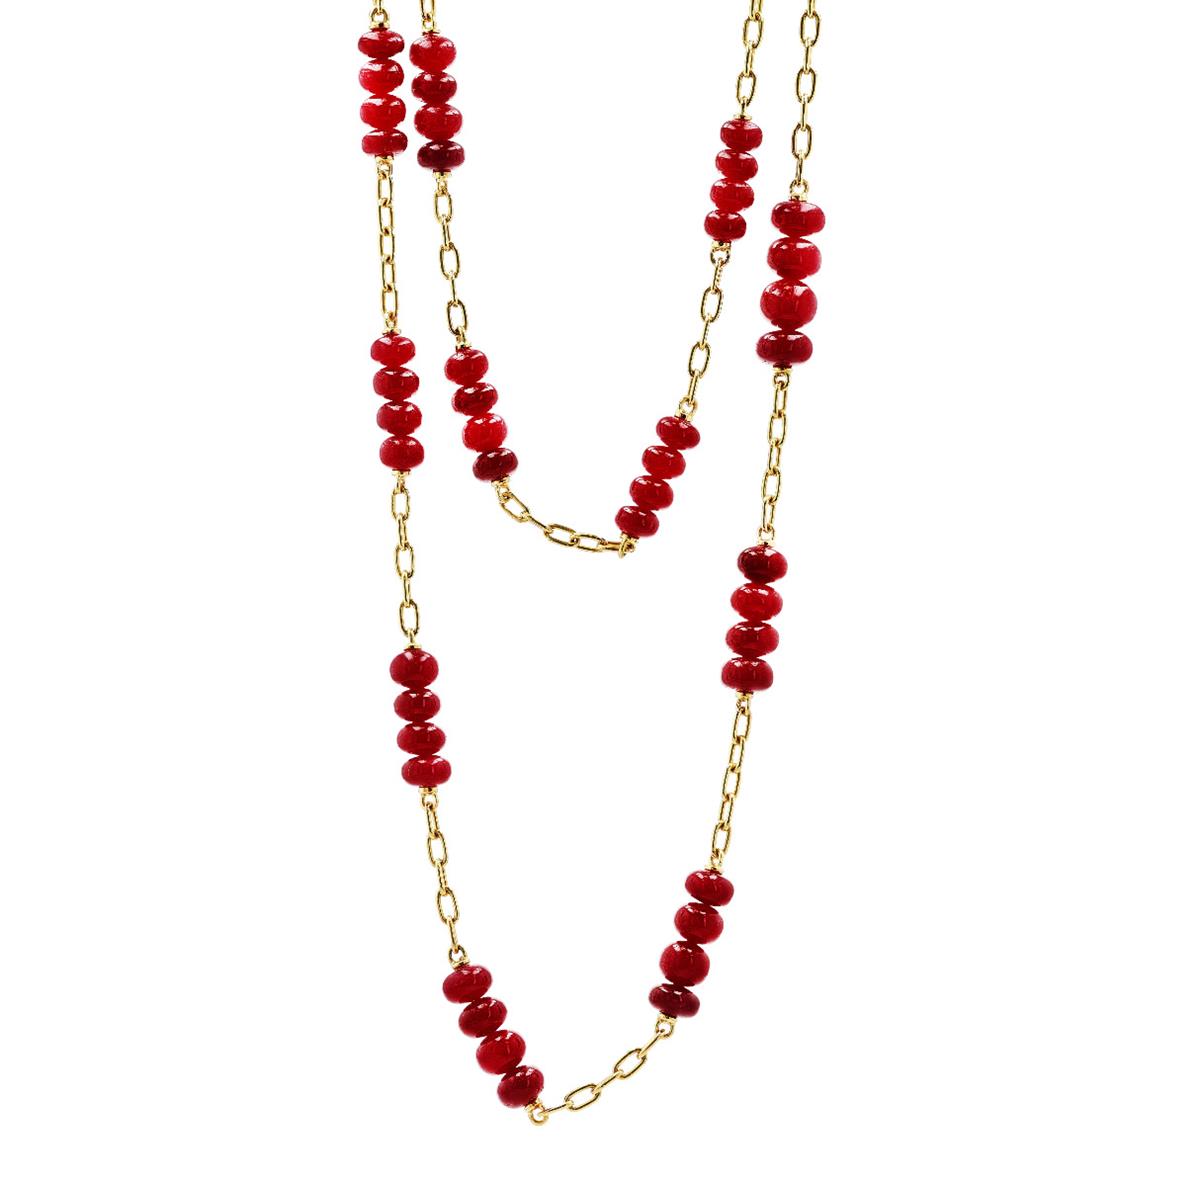 Vintage 18K Yellow Gold Ruby Bead Necklace